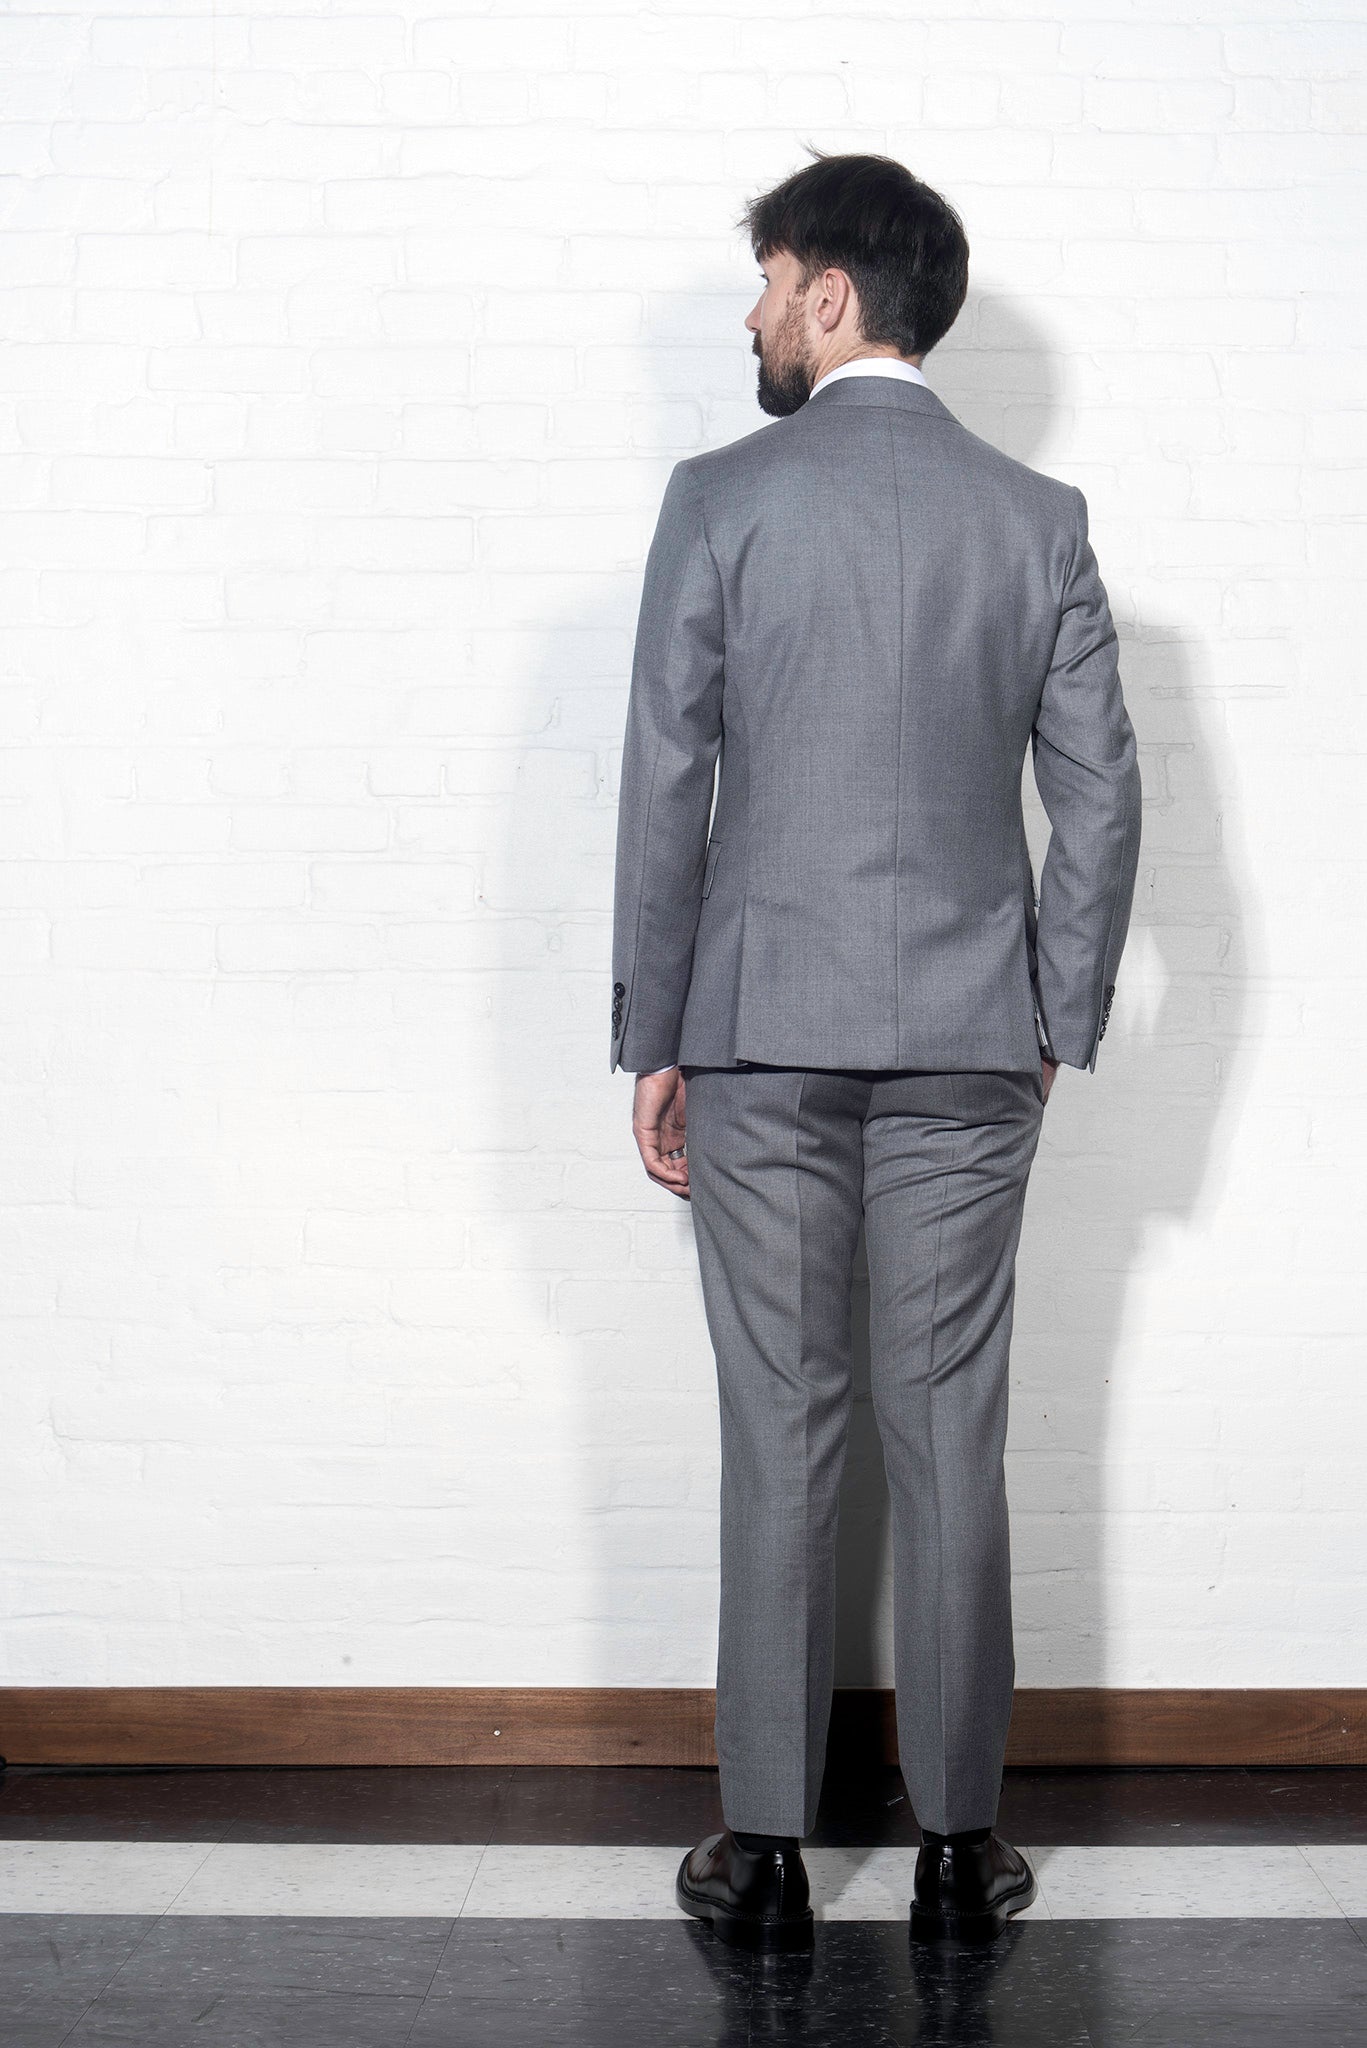 Brooklyn Tailors BKT50 Tailored Trouser in Super 110s Twill - Dove Gray on-body shot. Model is wearing pant with matching jacket, white dress shirt, and tie. Photo taken from back